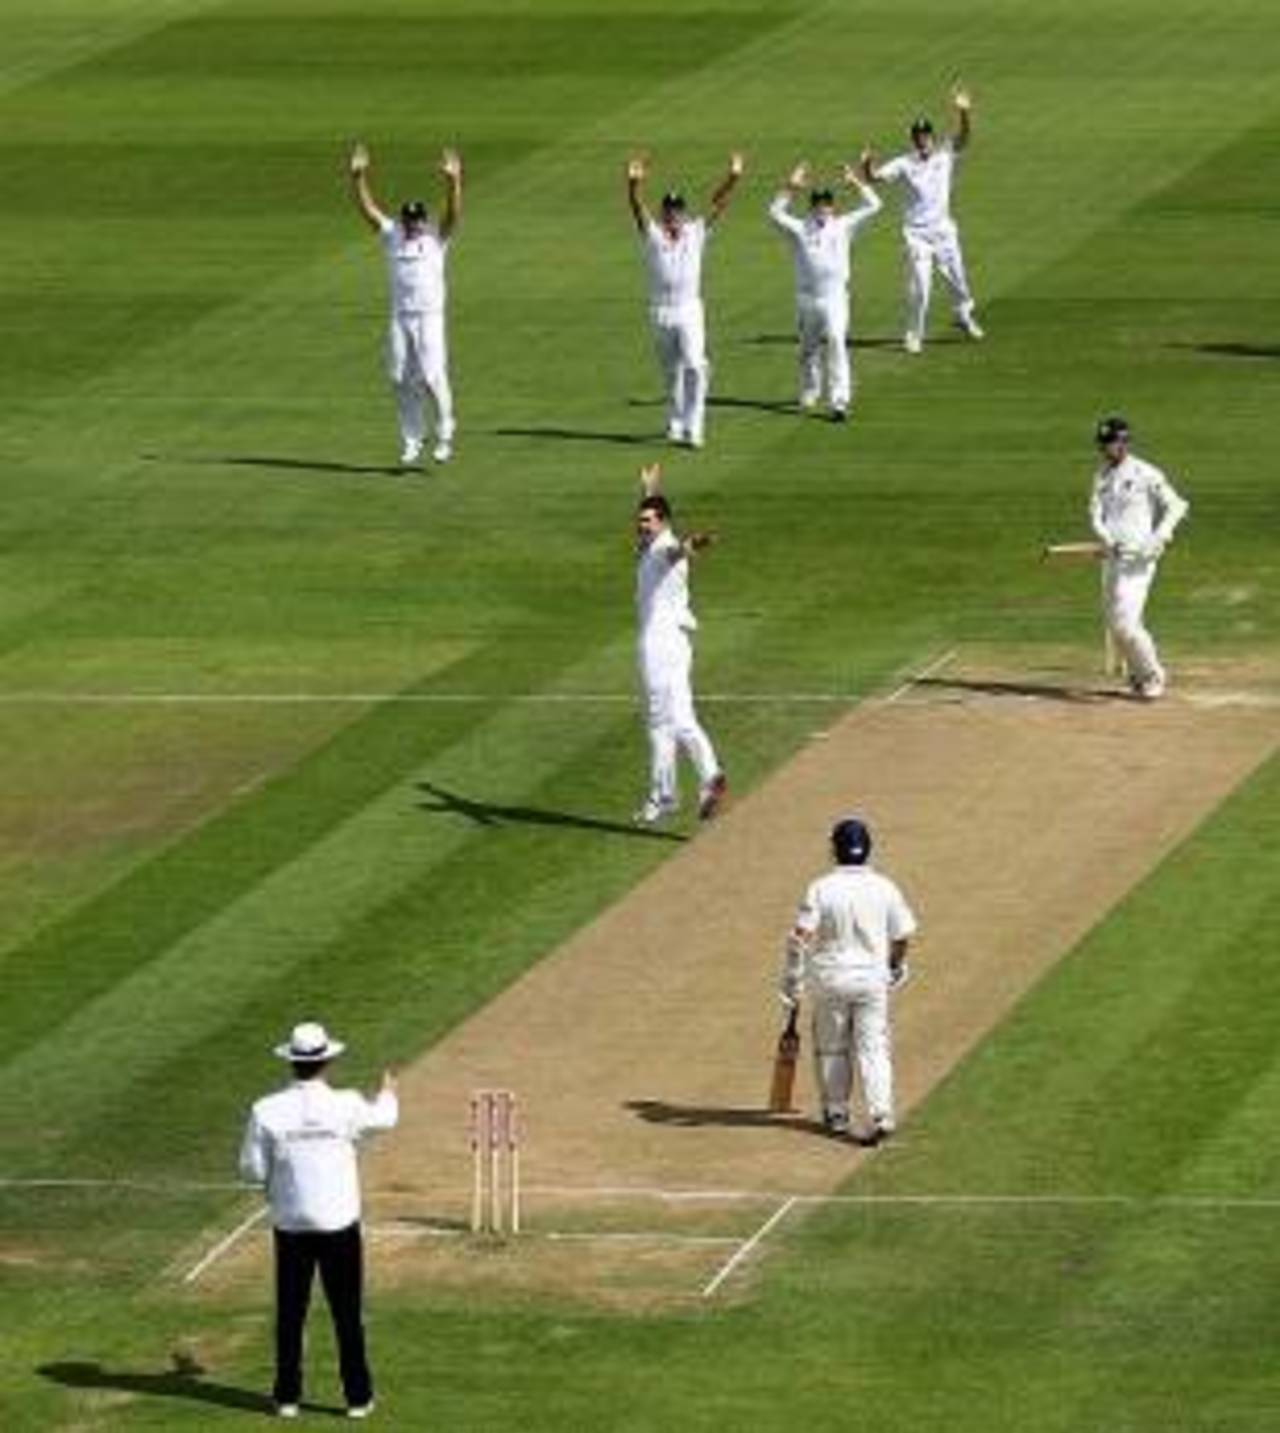 James Anderson gets rid of Rahul Dravid, England v India, 3rd Test, Edgbaston, 4th day, August 13, 2011